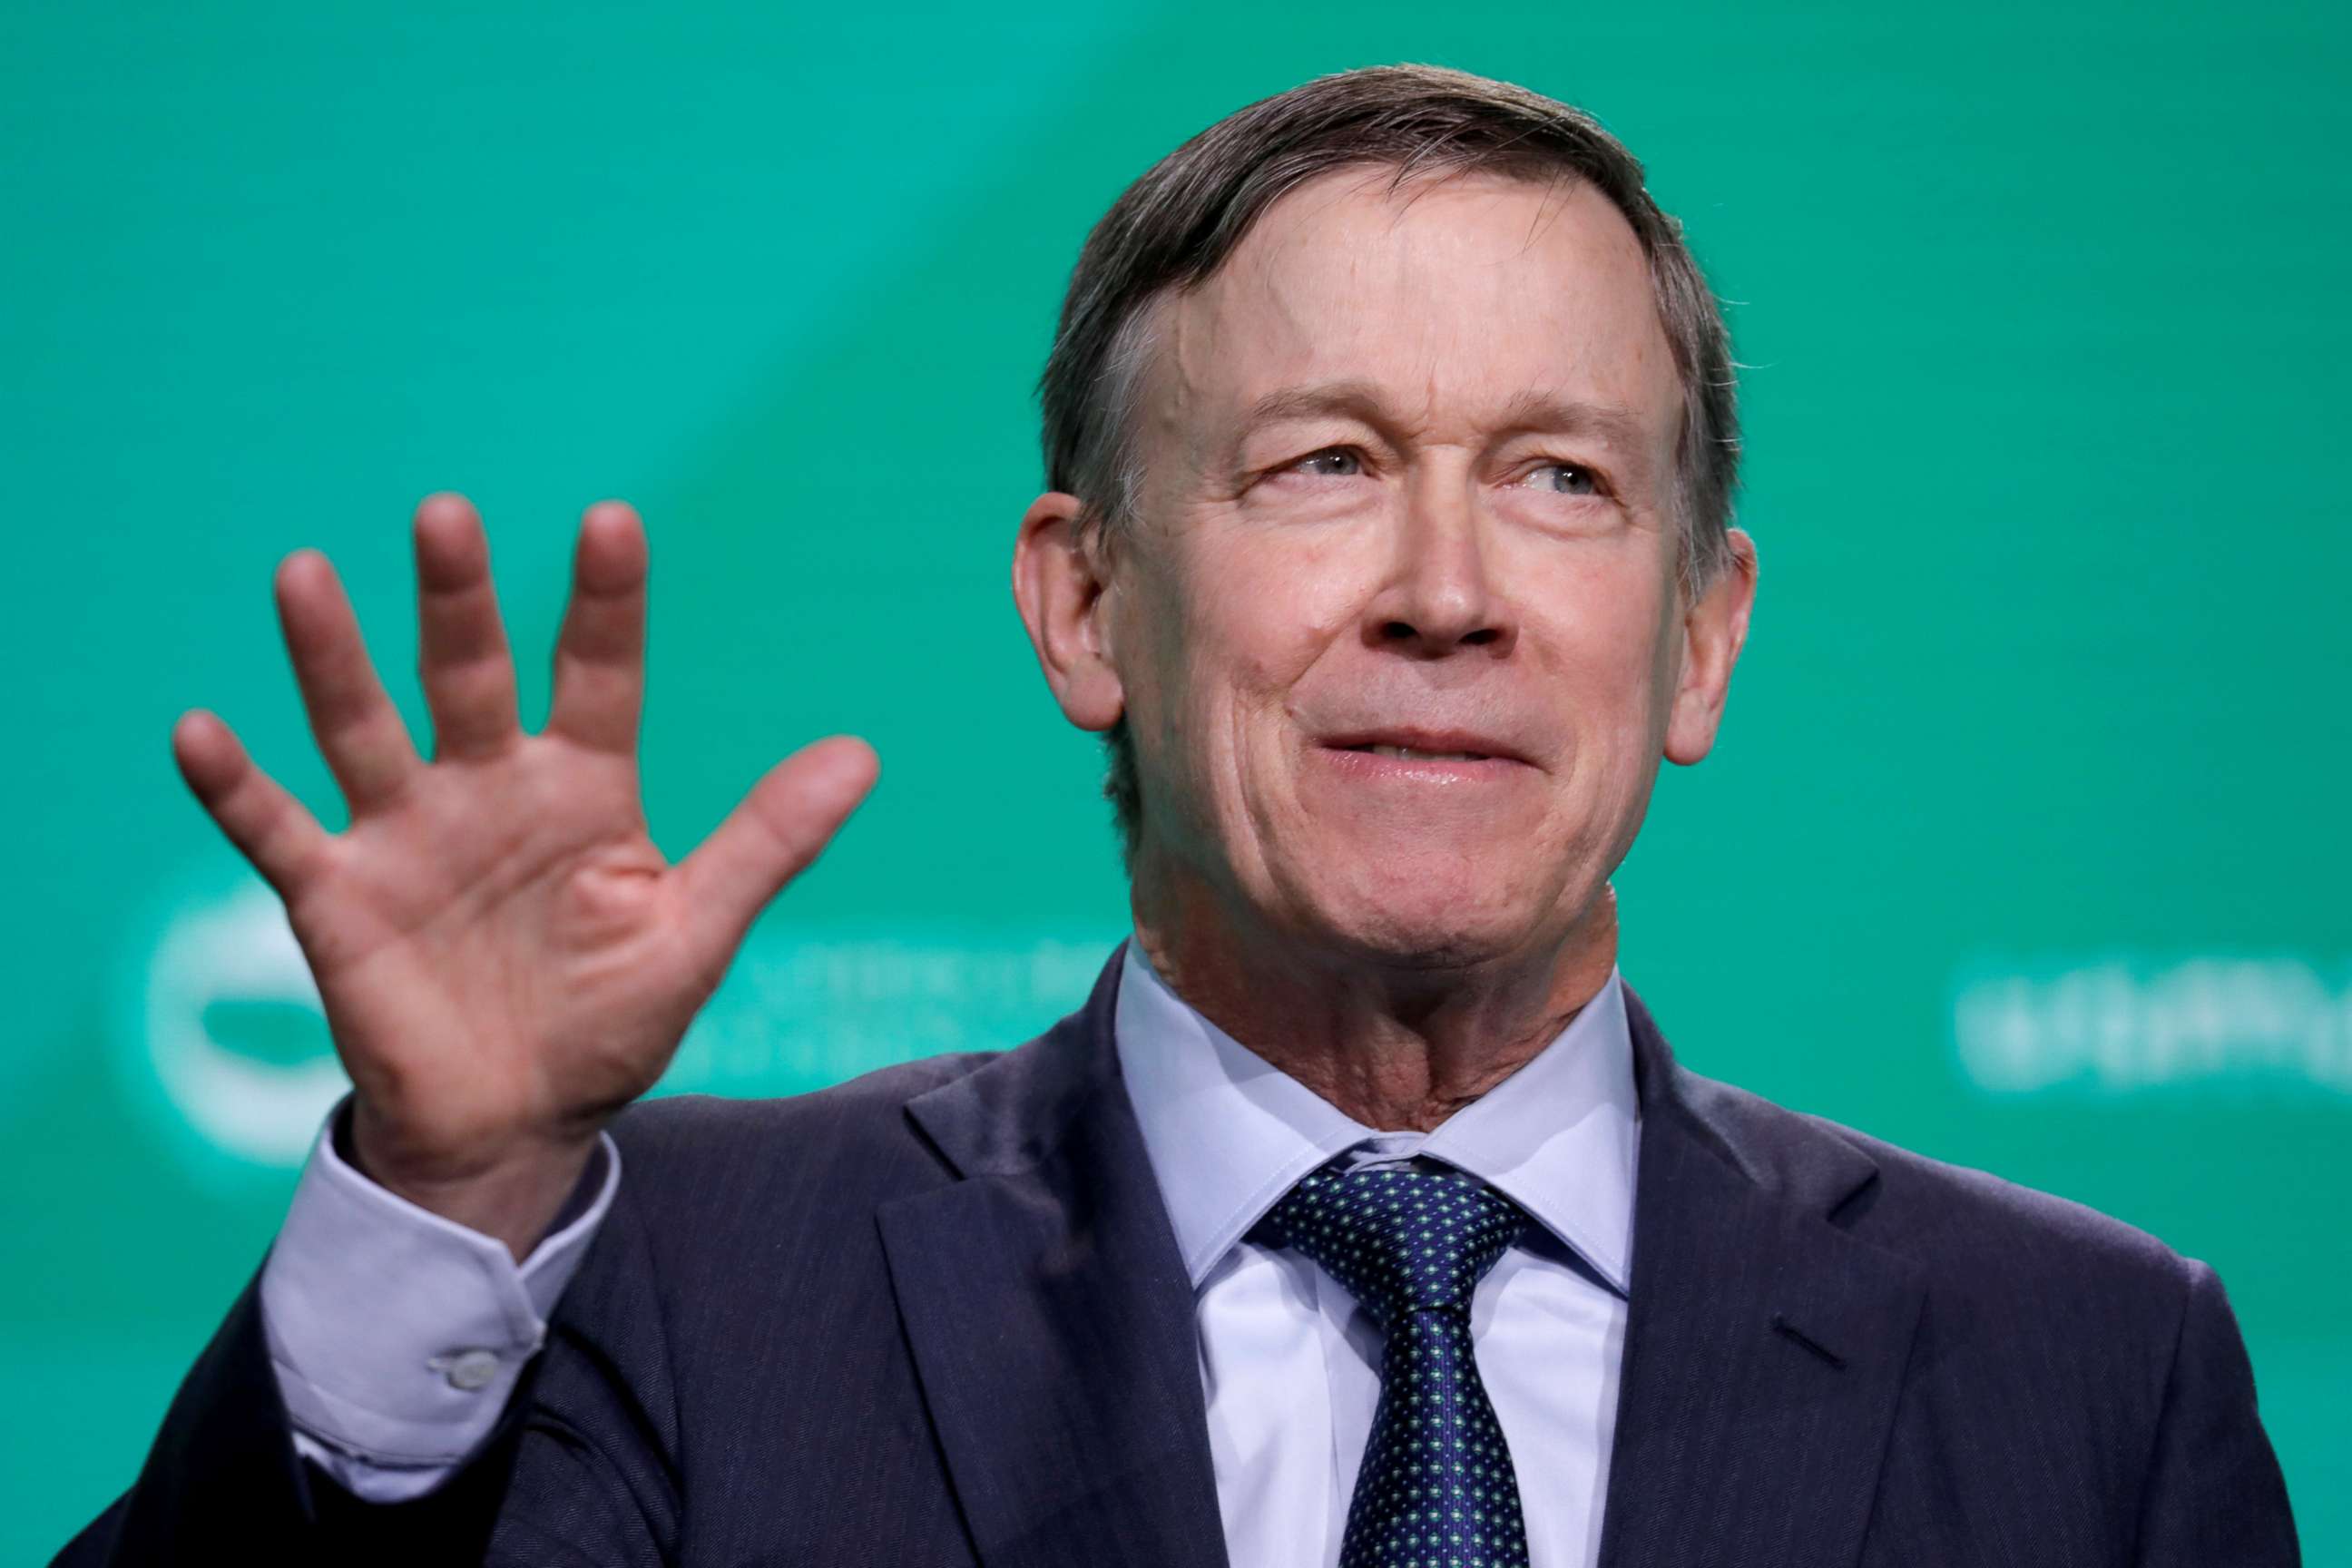 PHOTO: Former Gov. John Hickenlooper (D-CO) speaks at the United States Conference of Mayors winter meeting in Washington D.C., Jan. 24, 2019.